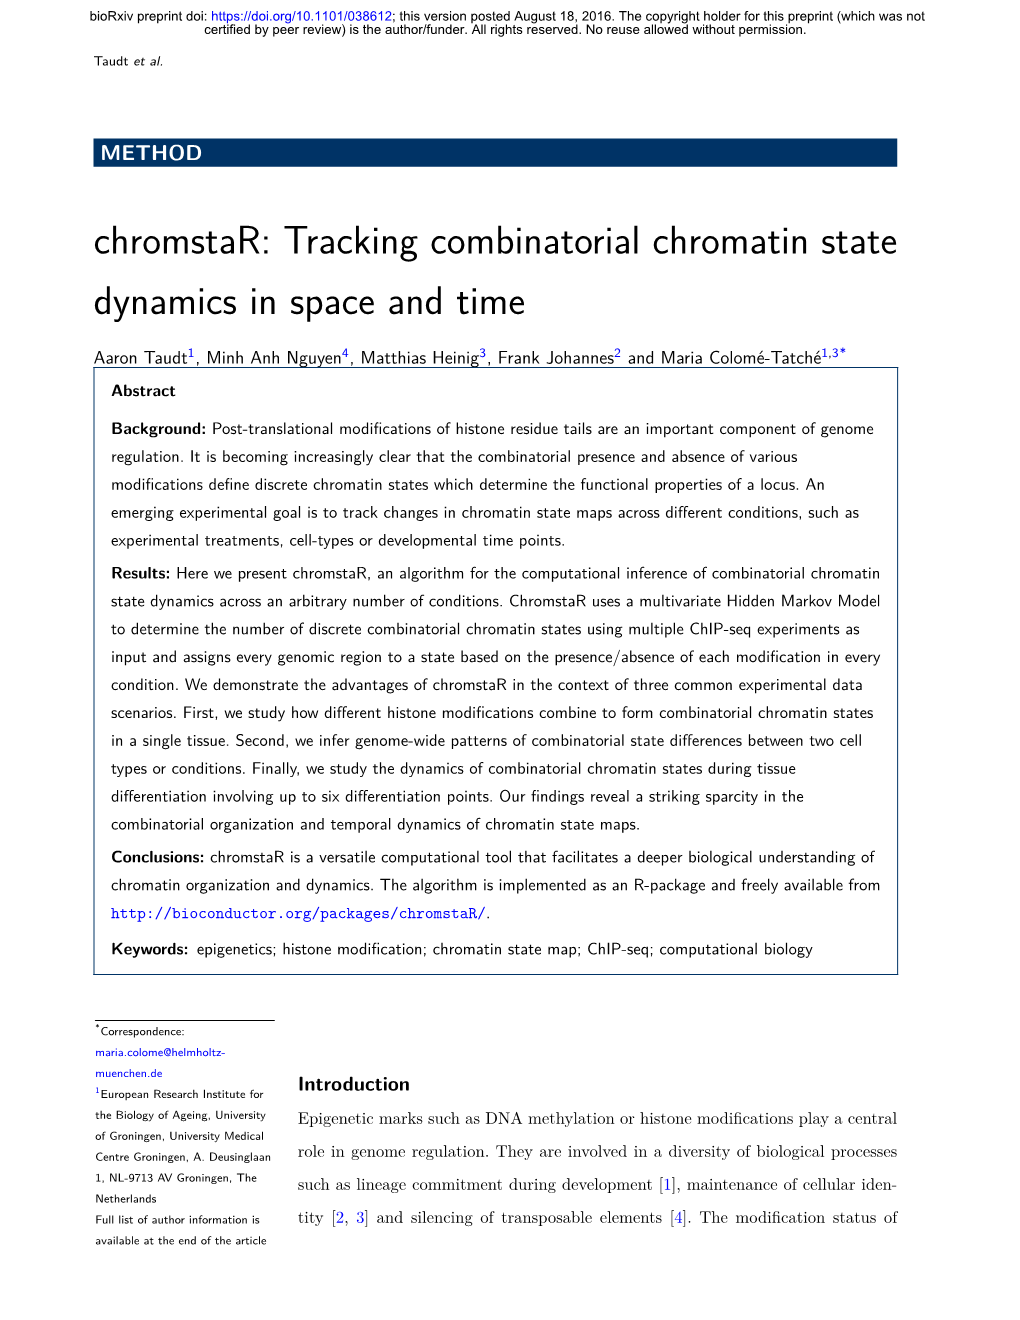 Tracking Combinatorial Chromatin State Dynamics in Space and Time